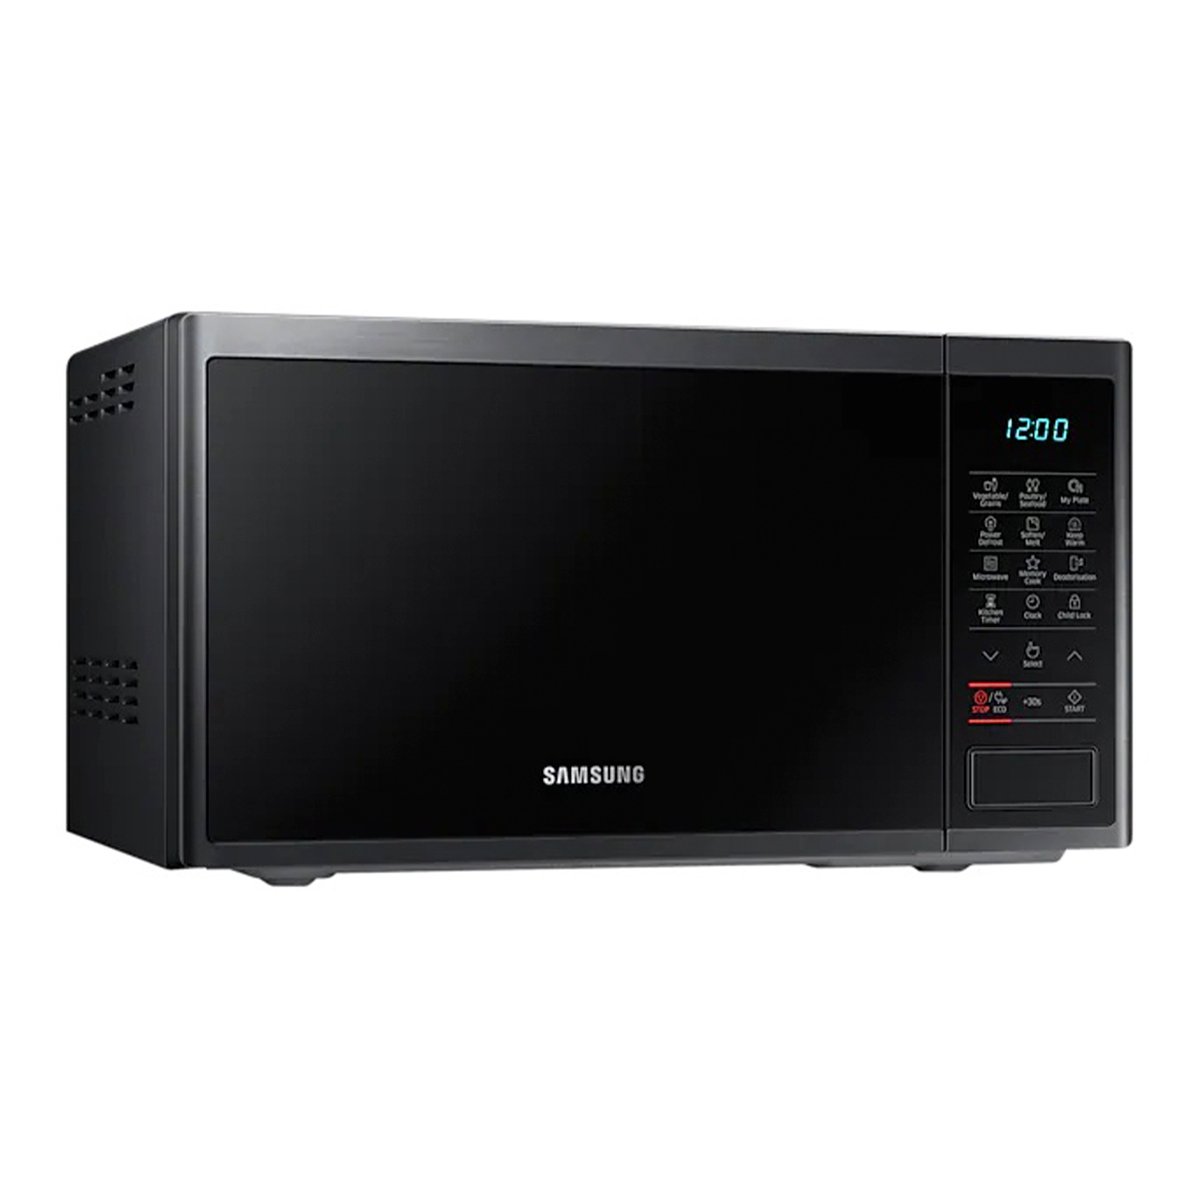 Samsung Microwave Oven MG40J5133AT 40Ltr